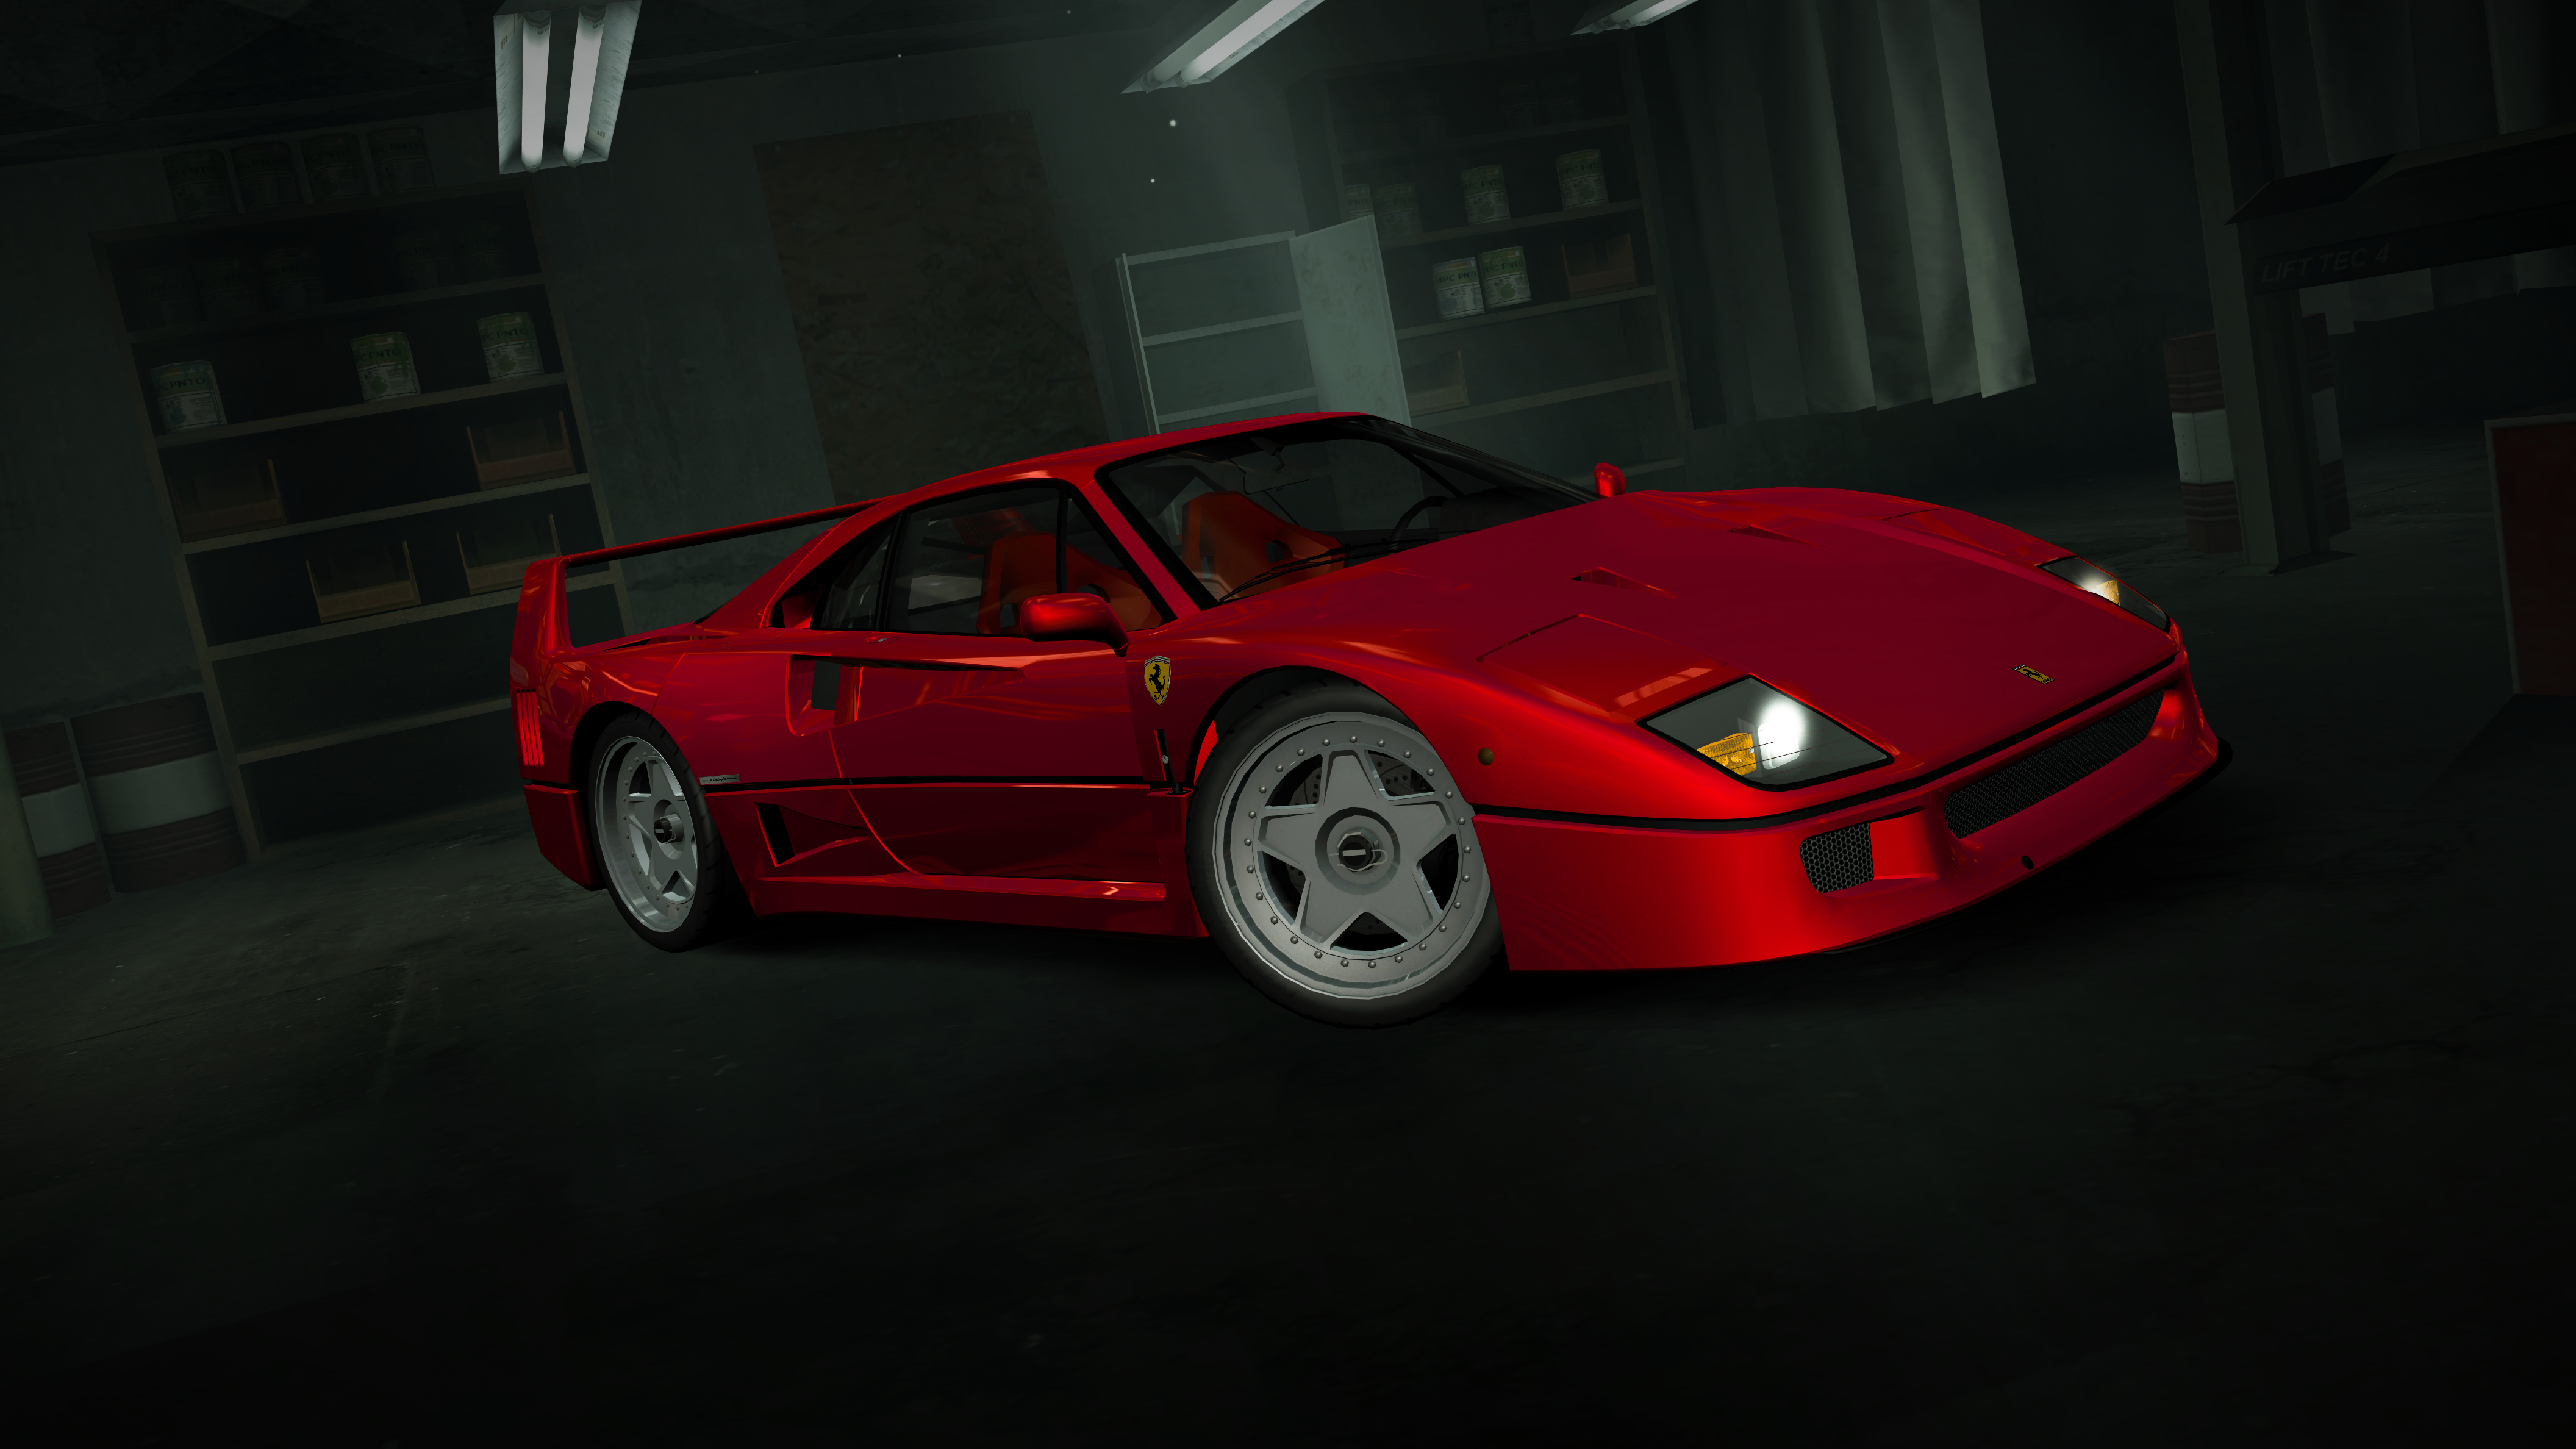 Ferrari F40 Need For Speed Need For Speed World Car Red Cars Garage Video Games Ferrari Front Angle  4224x2376